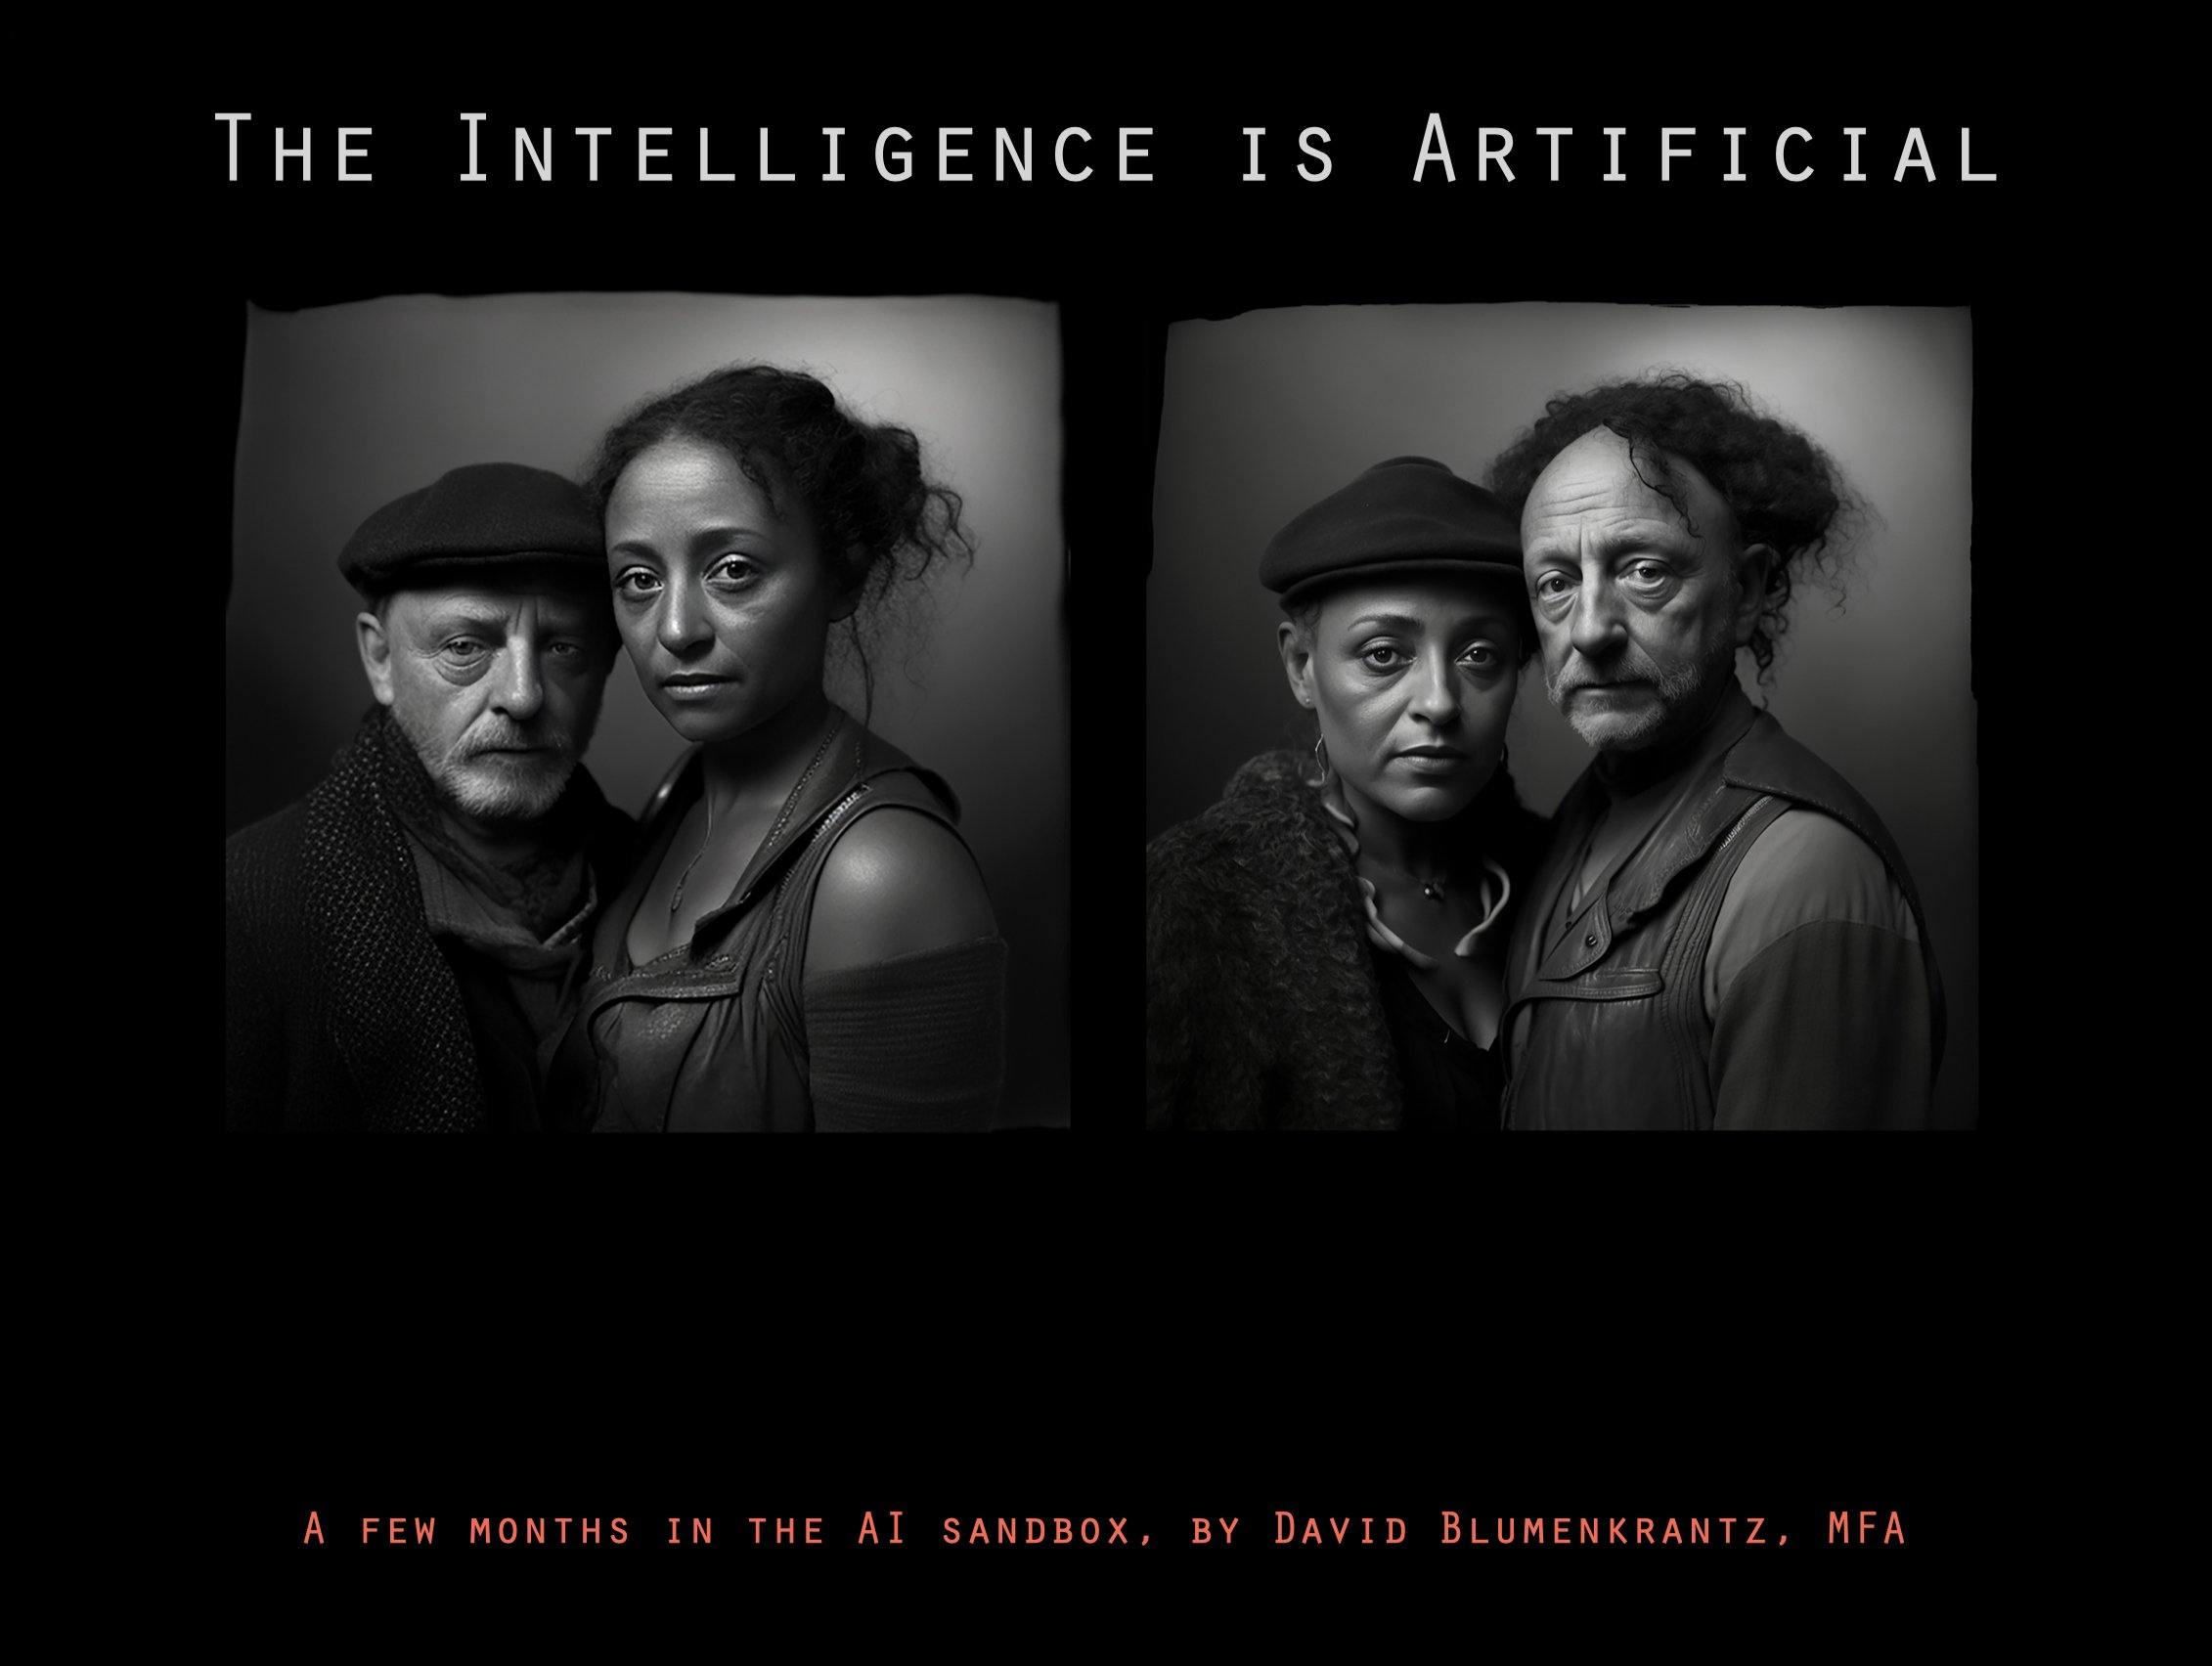   THE INTELLIGENCE IS ARTIFICIAL PDF  DOWNLOAD 